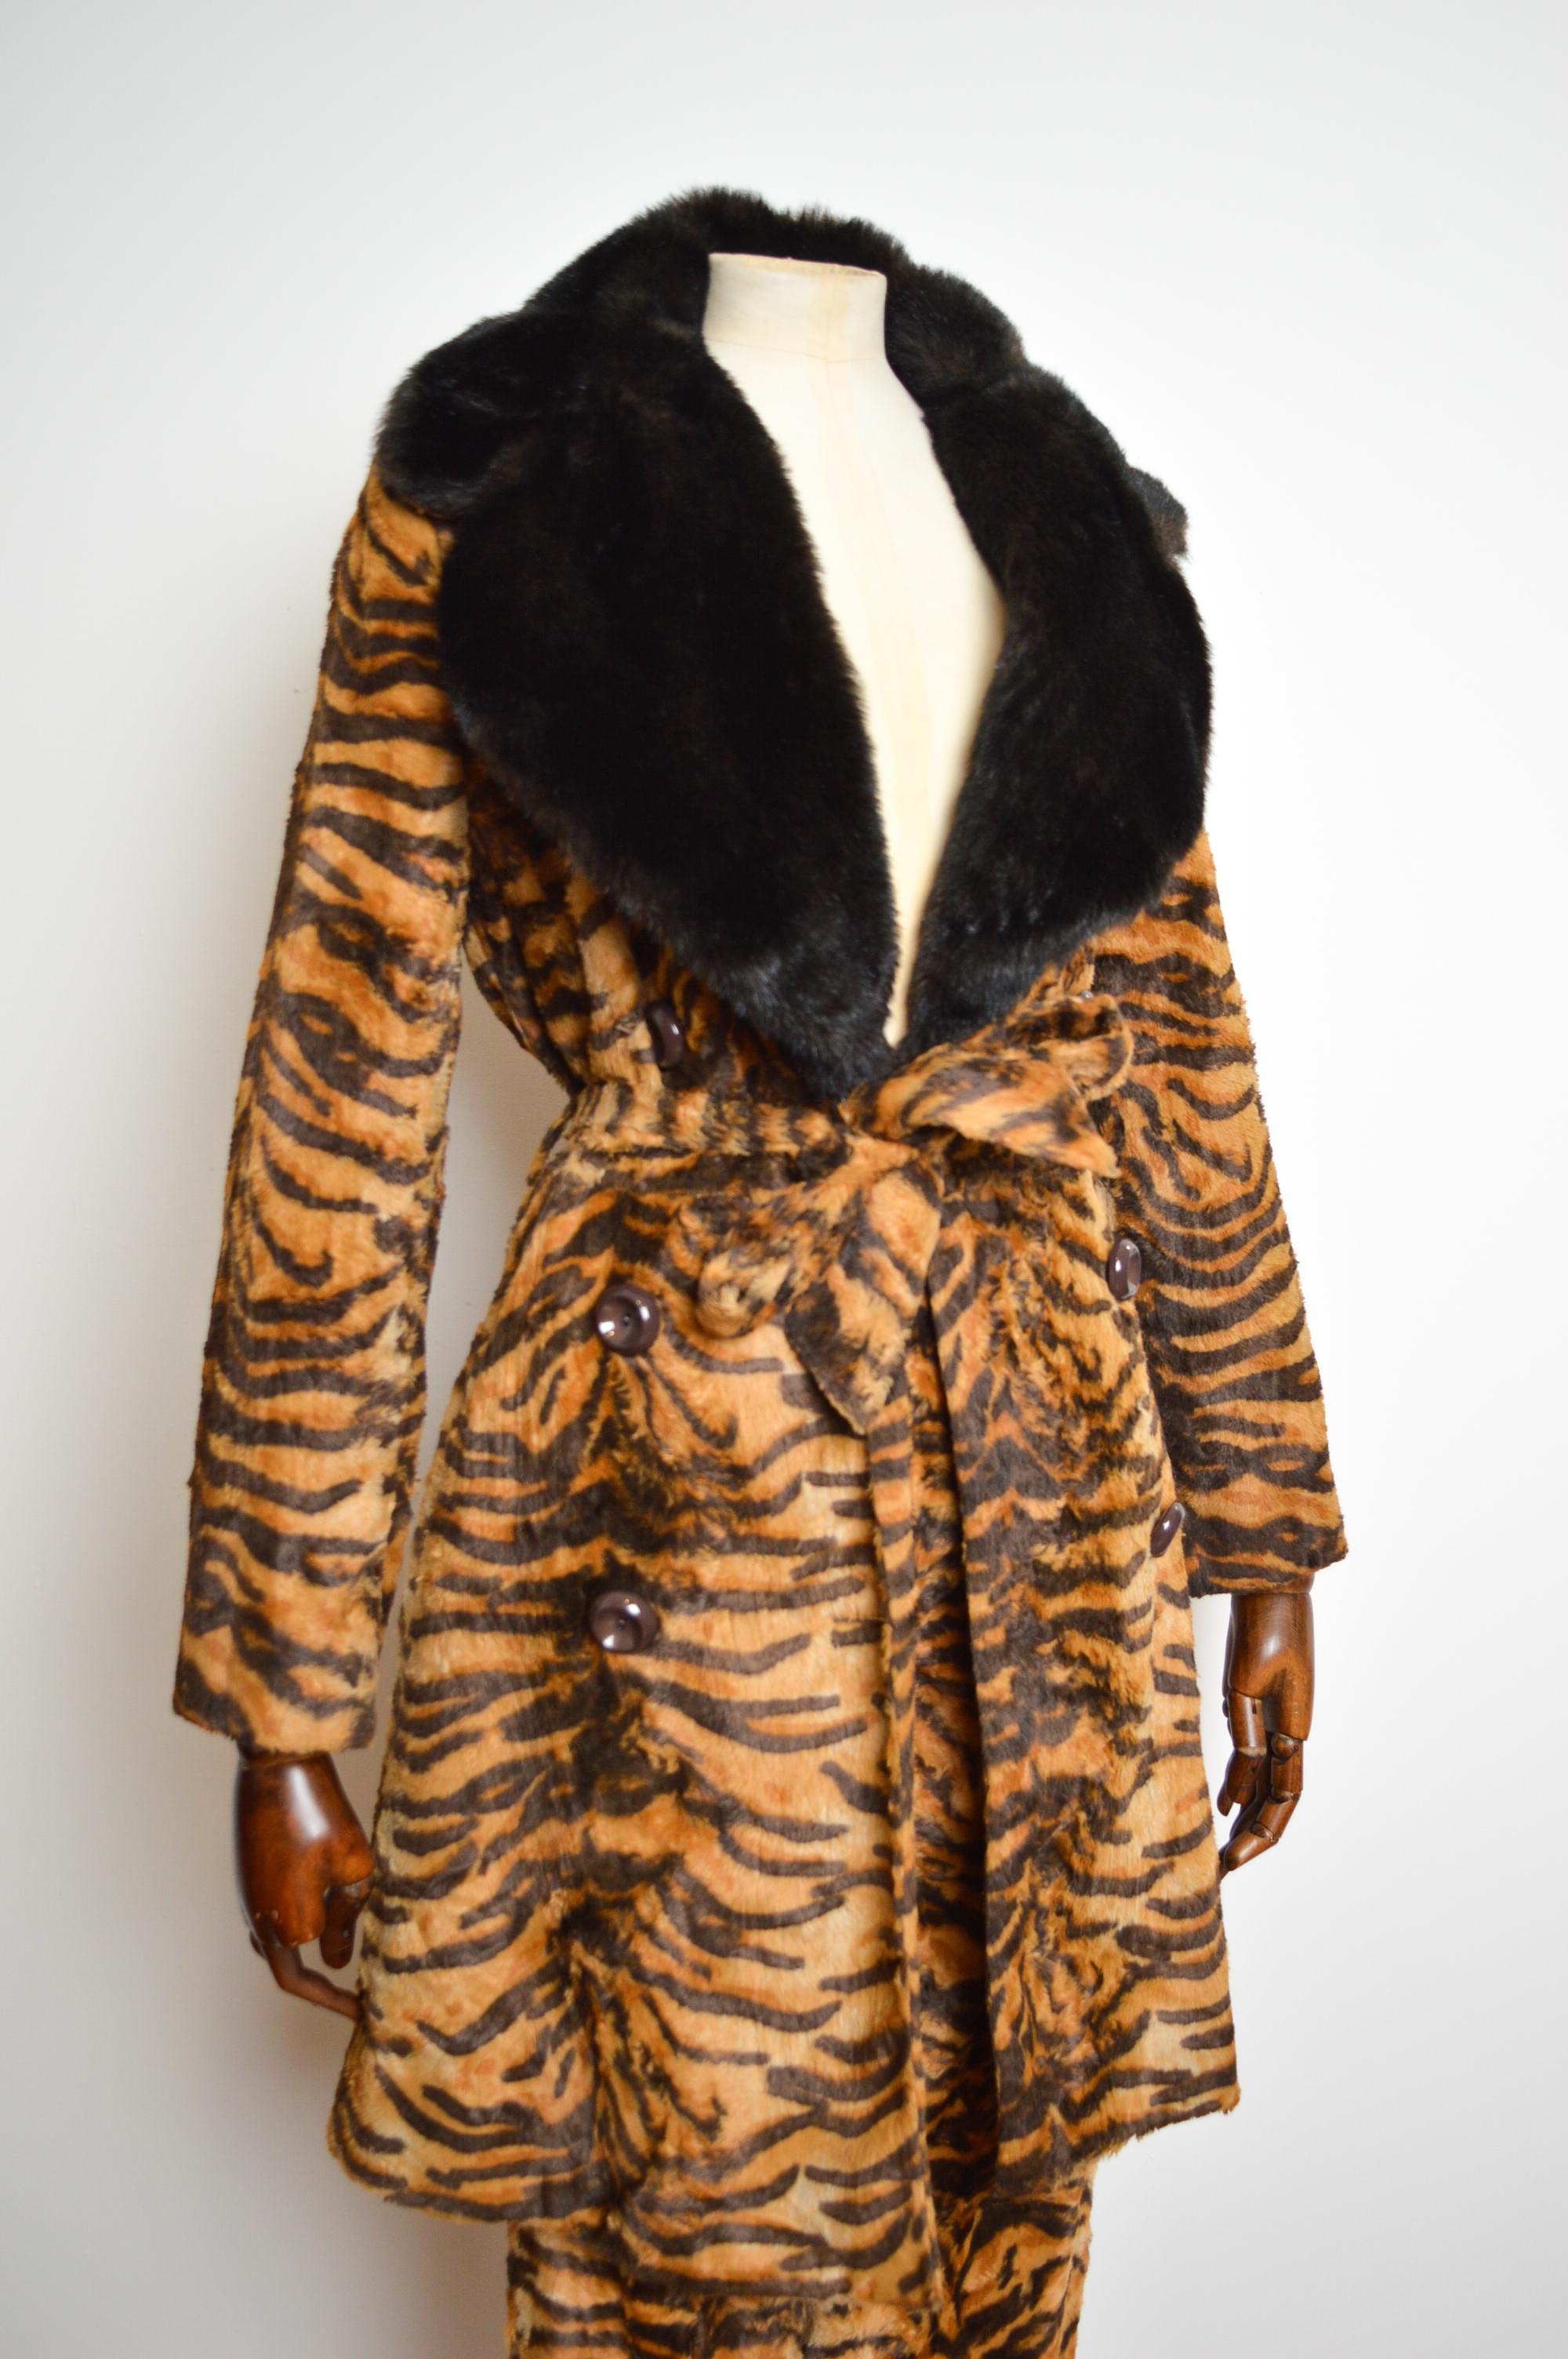 Early 1990's DOLCE & GABBANA Tiger Print Faux Fur Jacket Pants Suit Matching Set For Sale 16